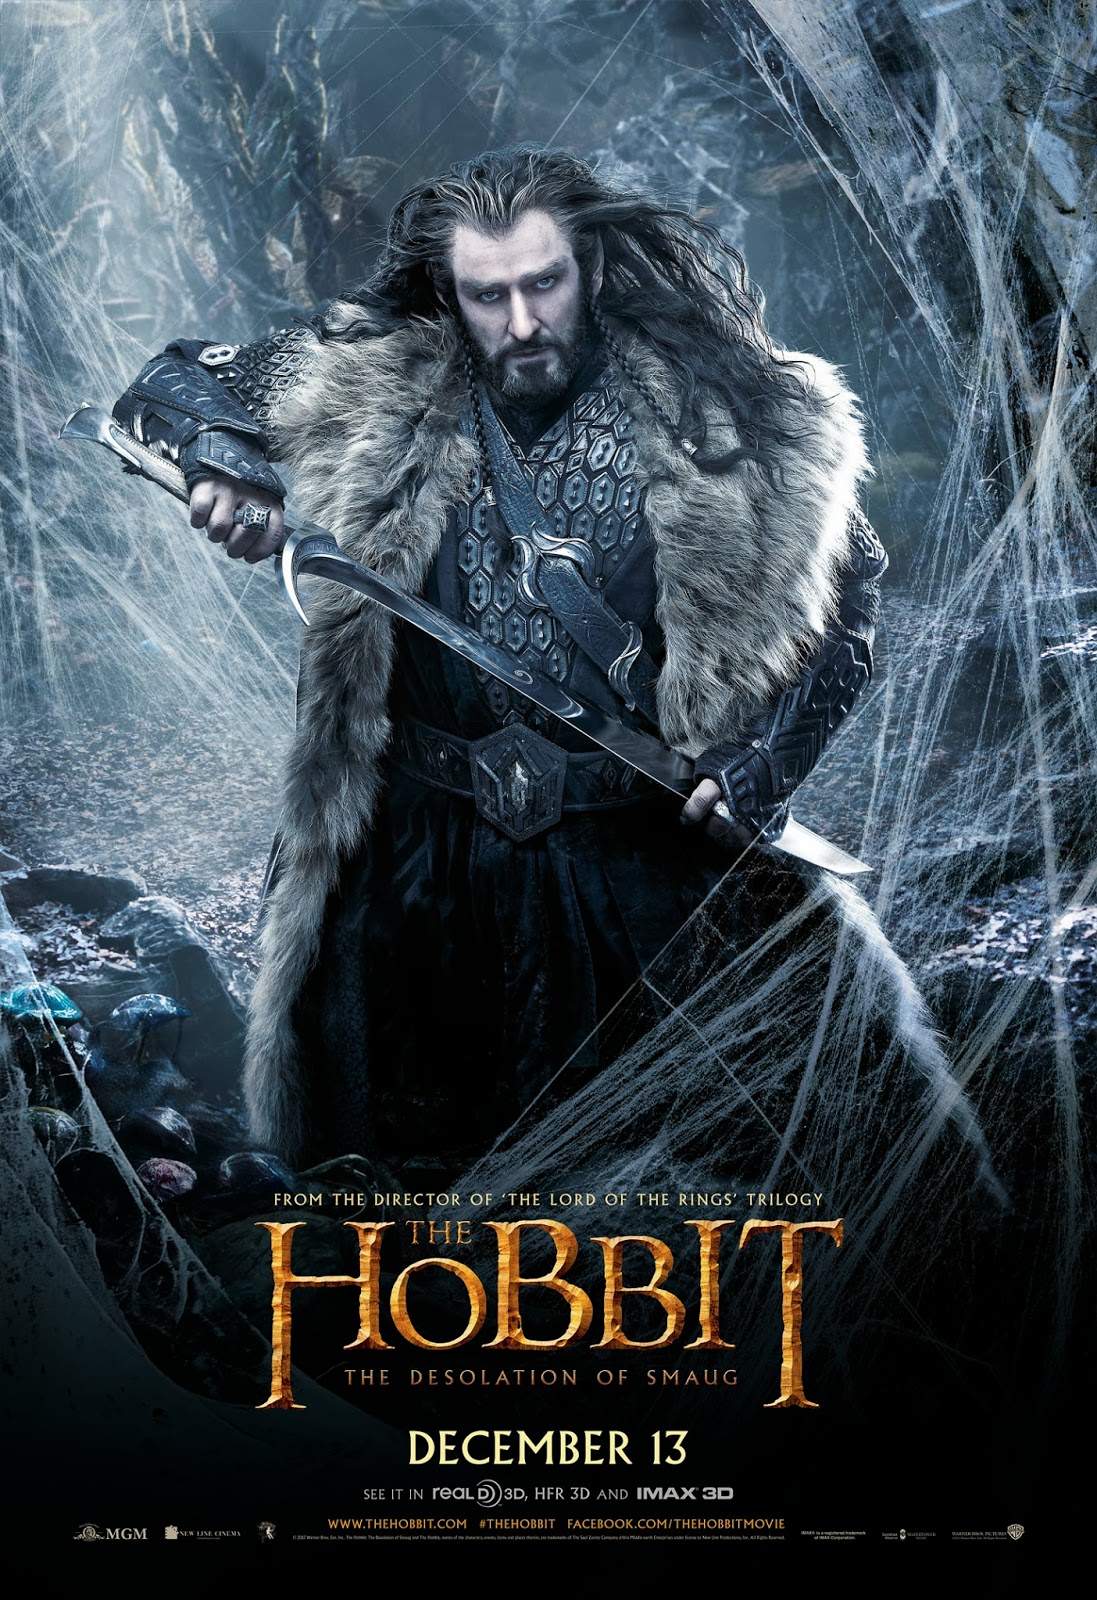 The Hobbit The Desolation Of Smaug HD Wallpaper Poster For iPhone 5